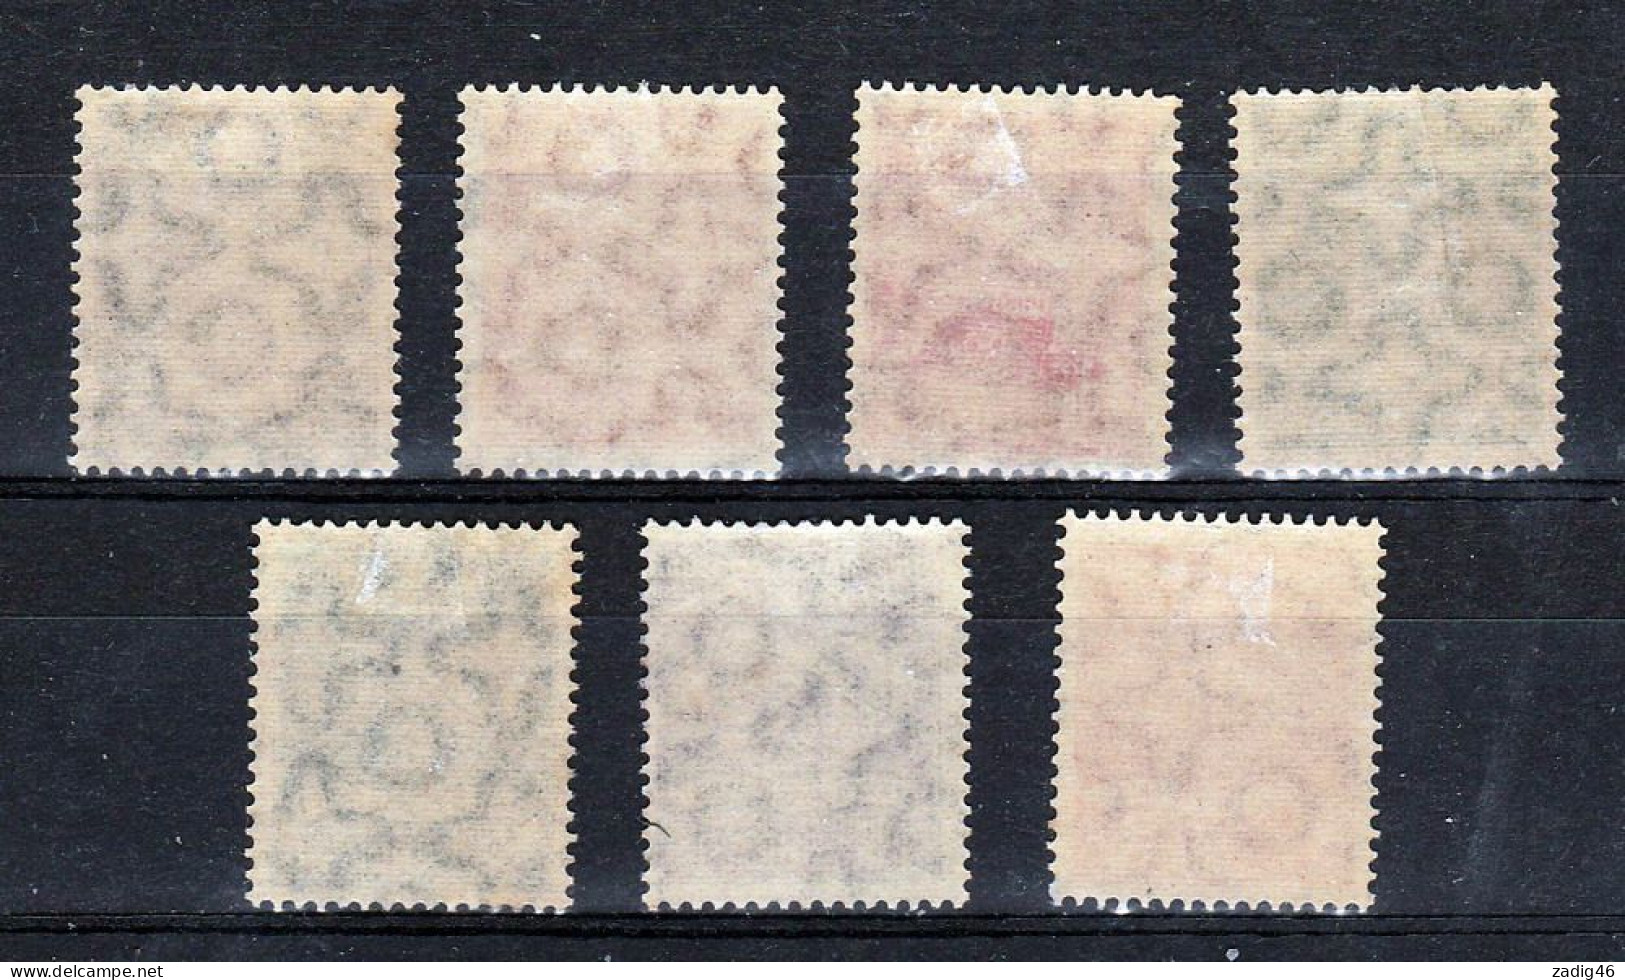 BRESIL - COMPAGNIE CONDOR - TIMBRES N° 1 A 7 - NEUFS AVEC INFIMES TRACES DE CHARNIERES A PEINE VISIBLES - Luftpost (private Gesellschaften)